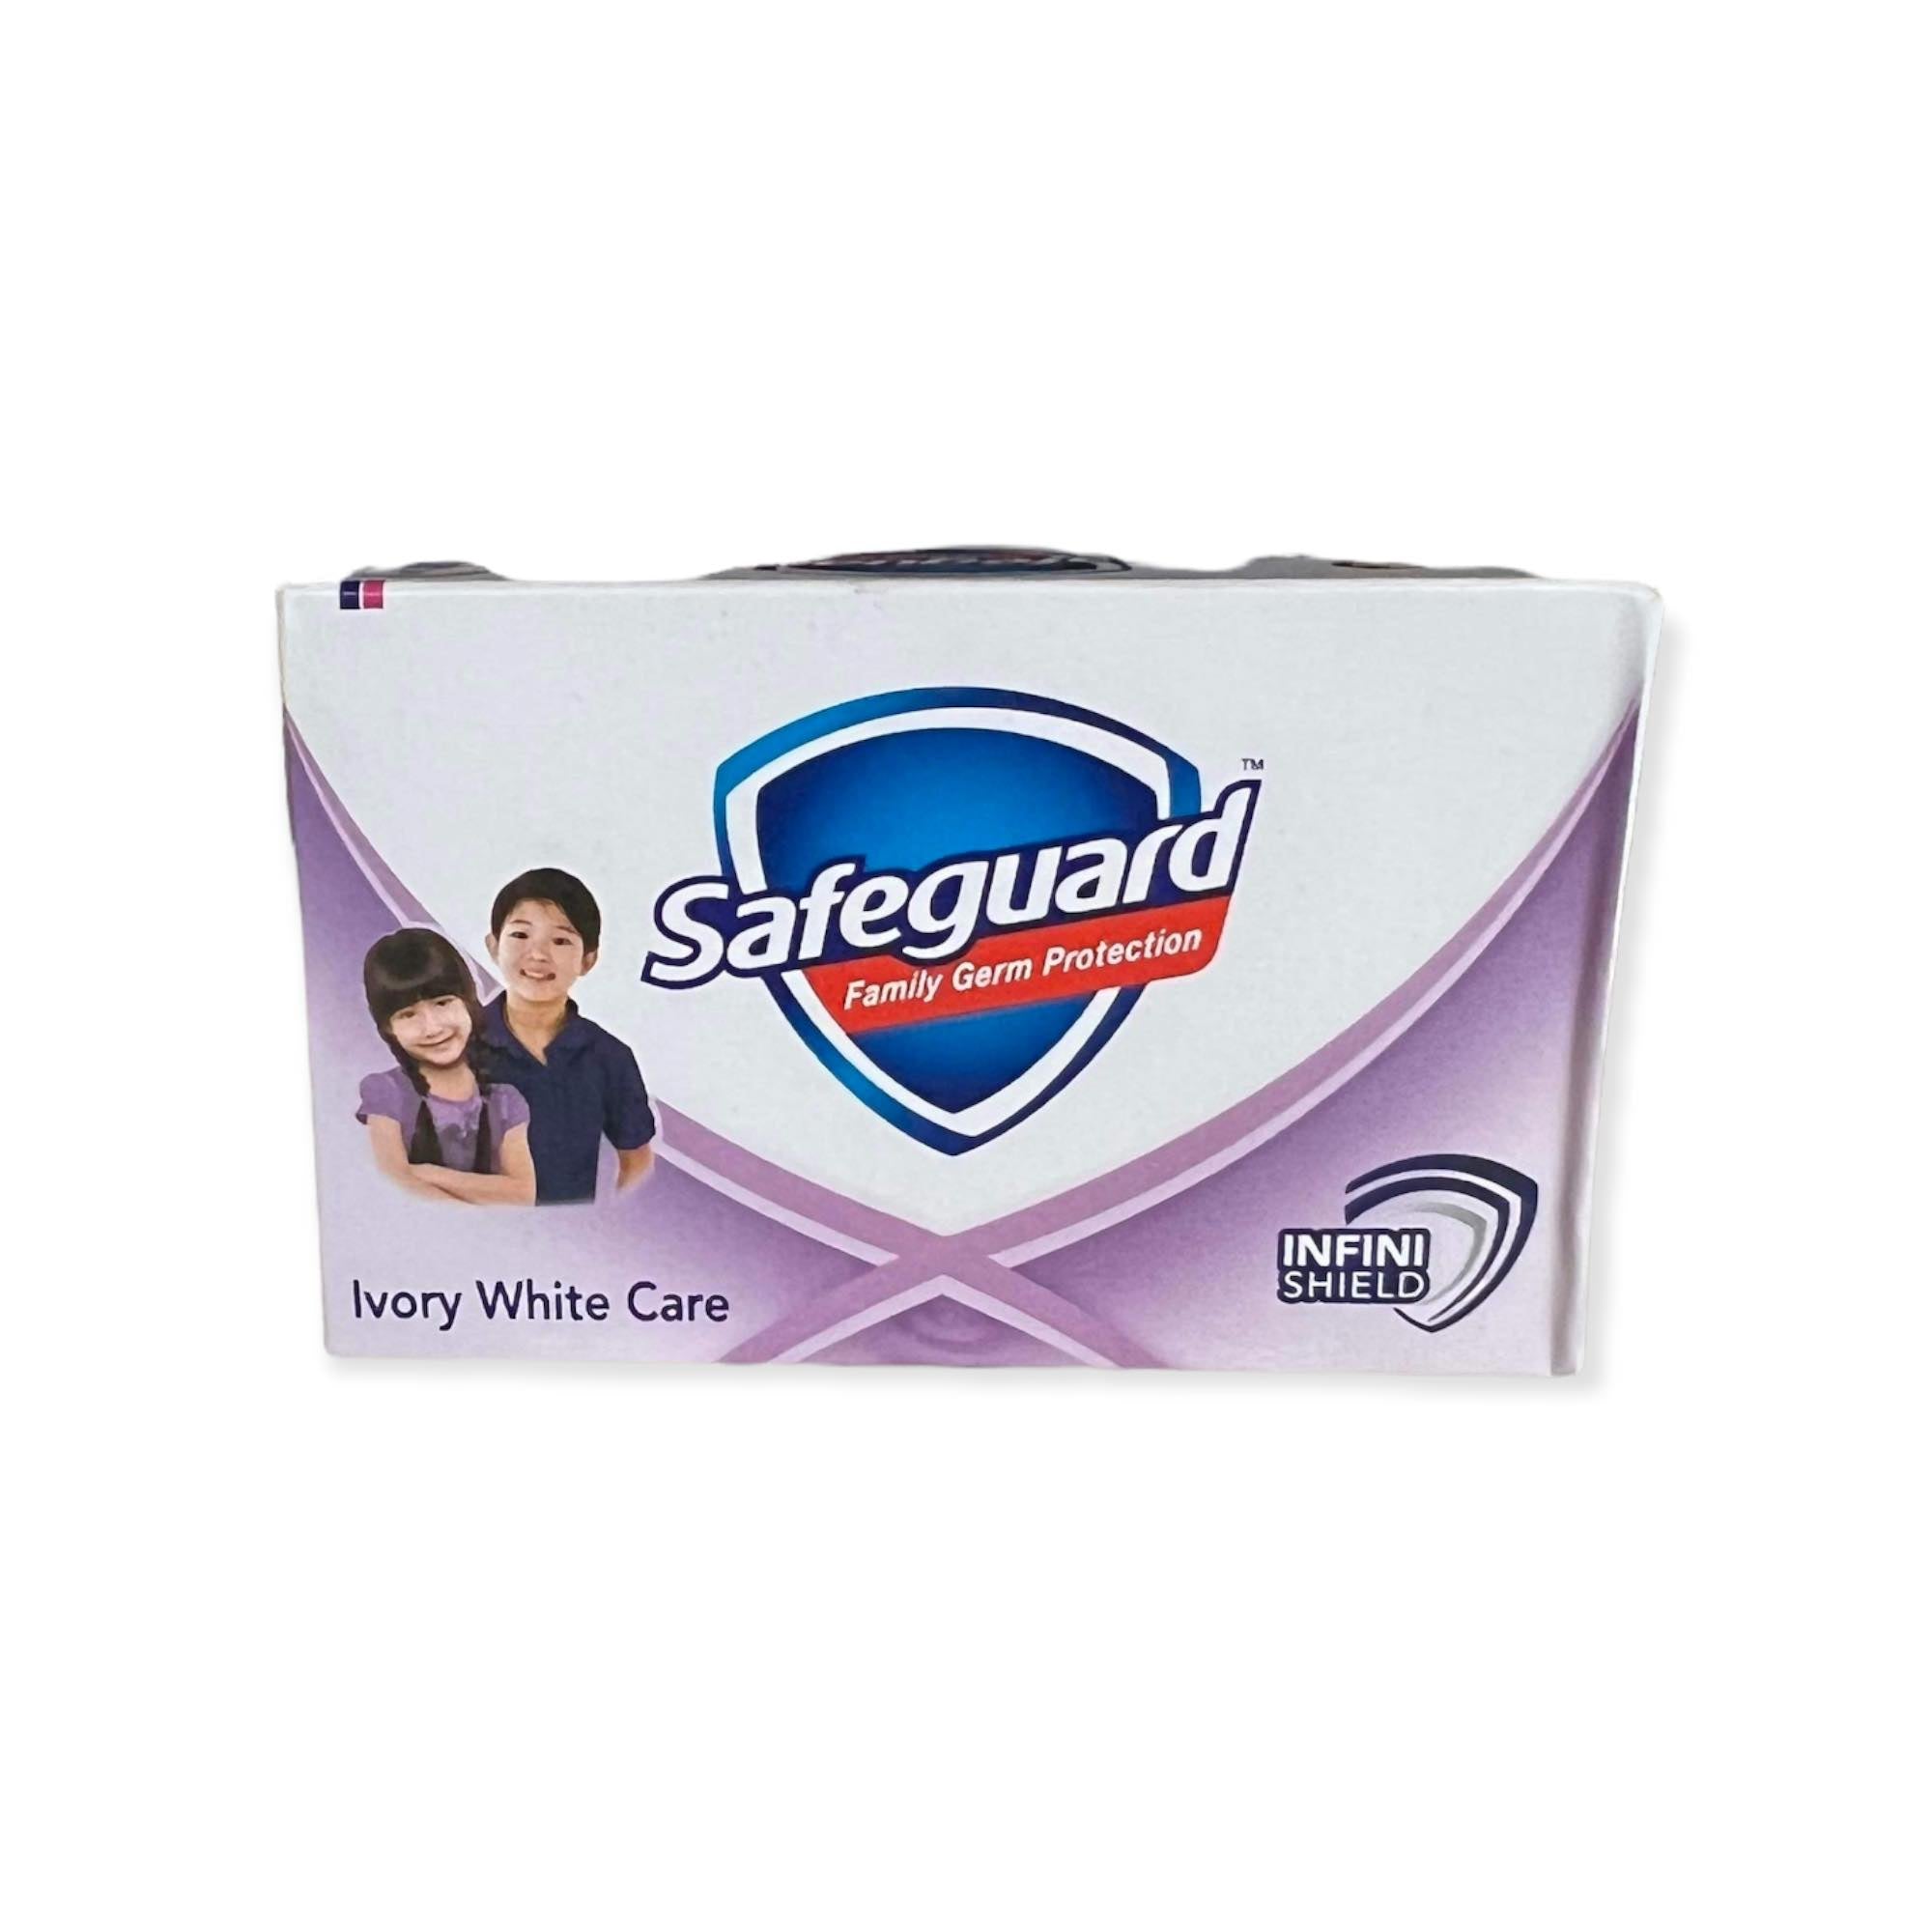 Safeguard - Ivory White Care - Family Germ Protection - Soap Bar 130 G